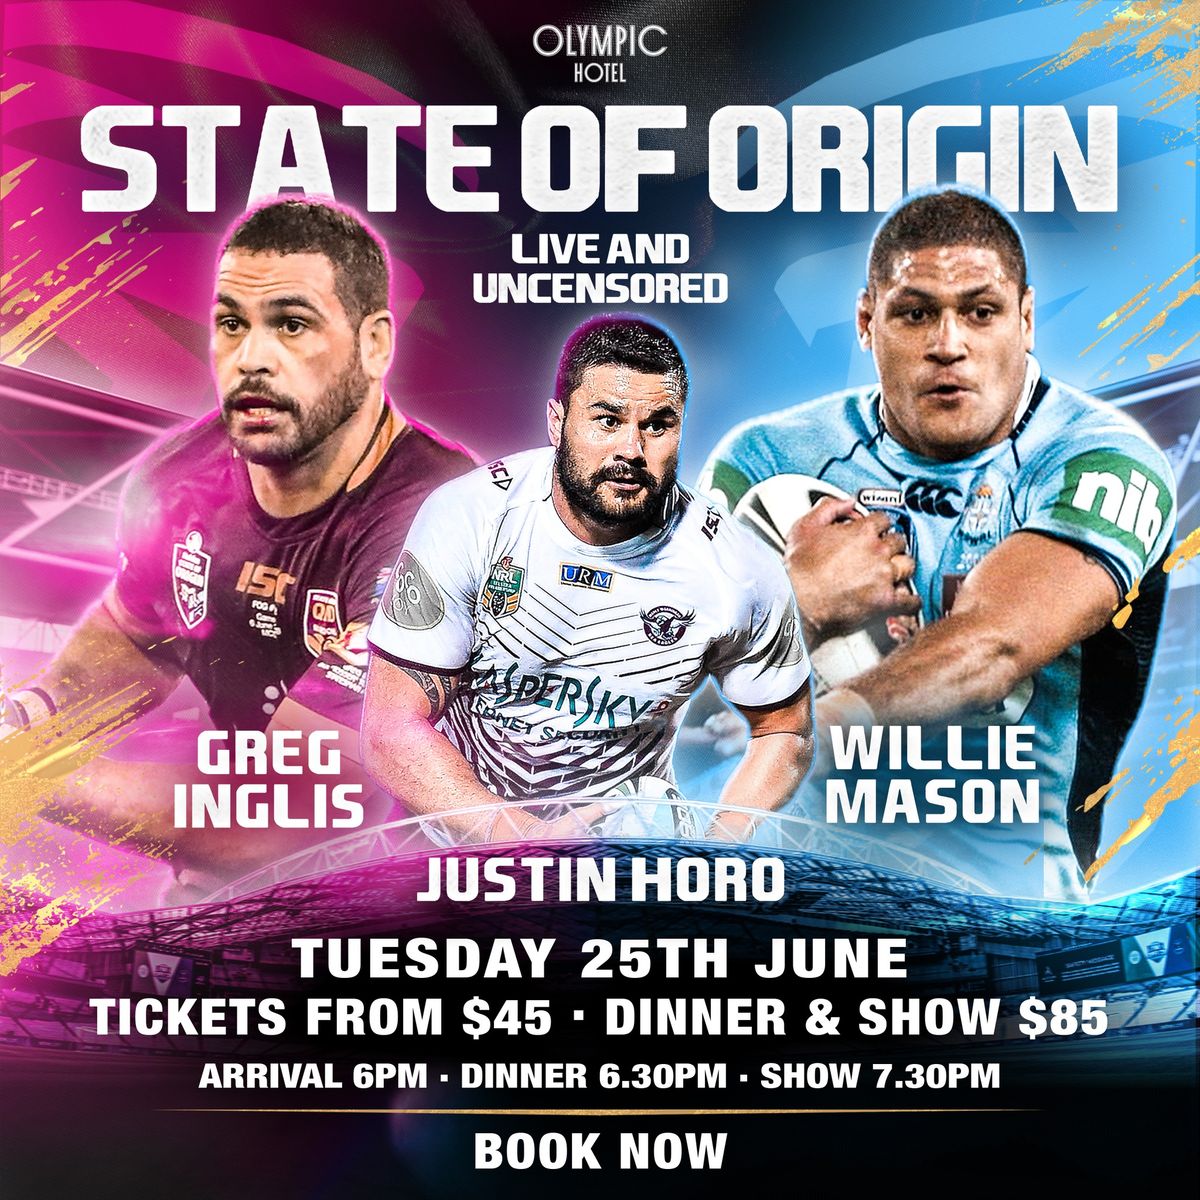 State of Origin LIVE SHOW ft. Inglis, Horo & Mason at The Olympic Hotel!